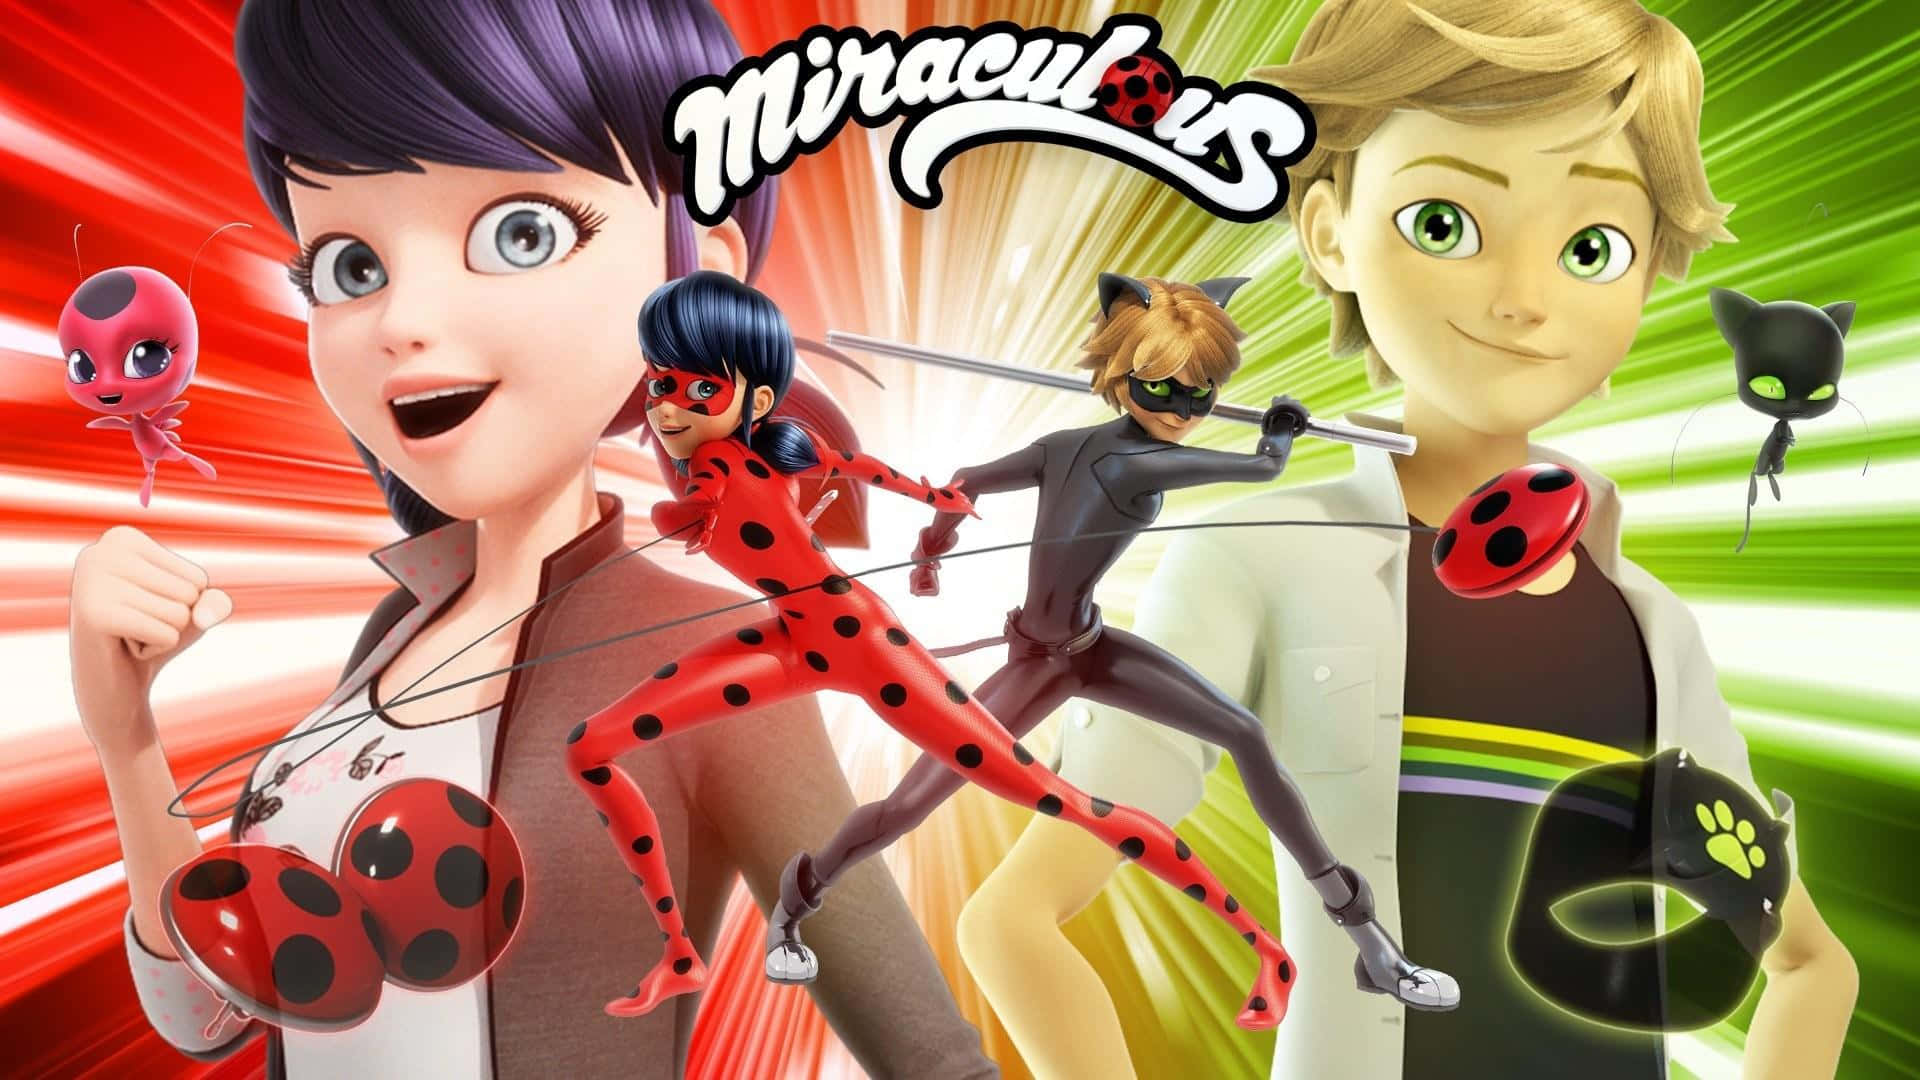 Adrien and Marinette, the heroes of Paris from Ladybug and Cat Noir